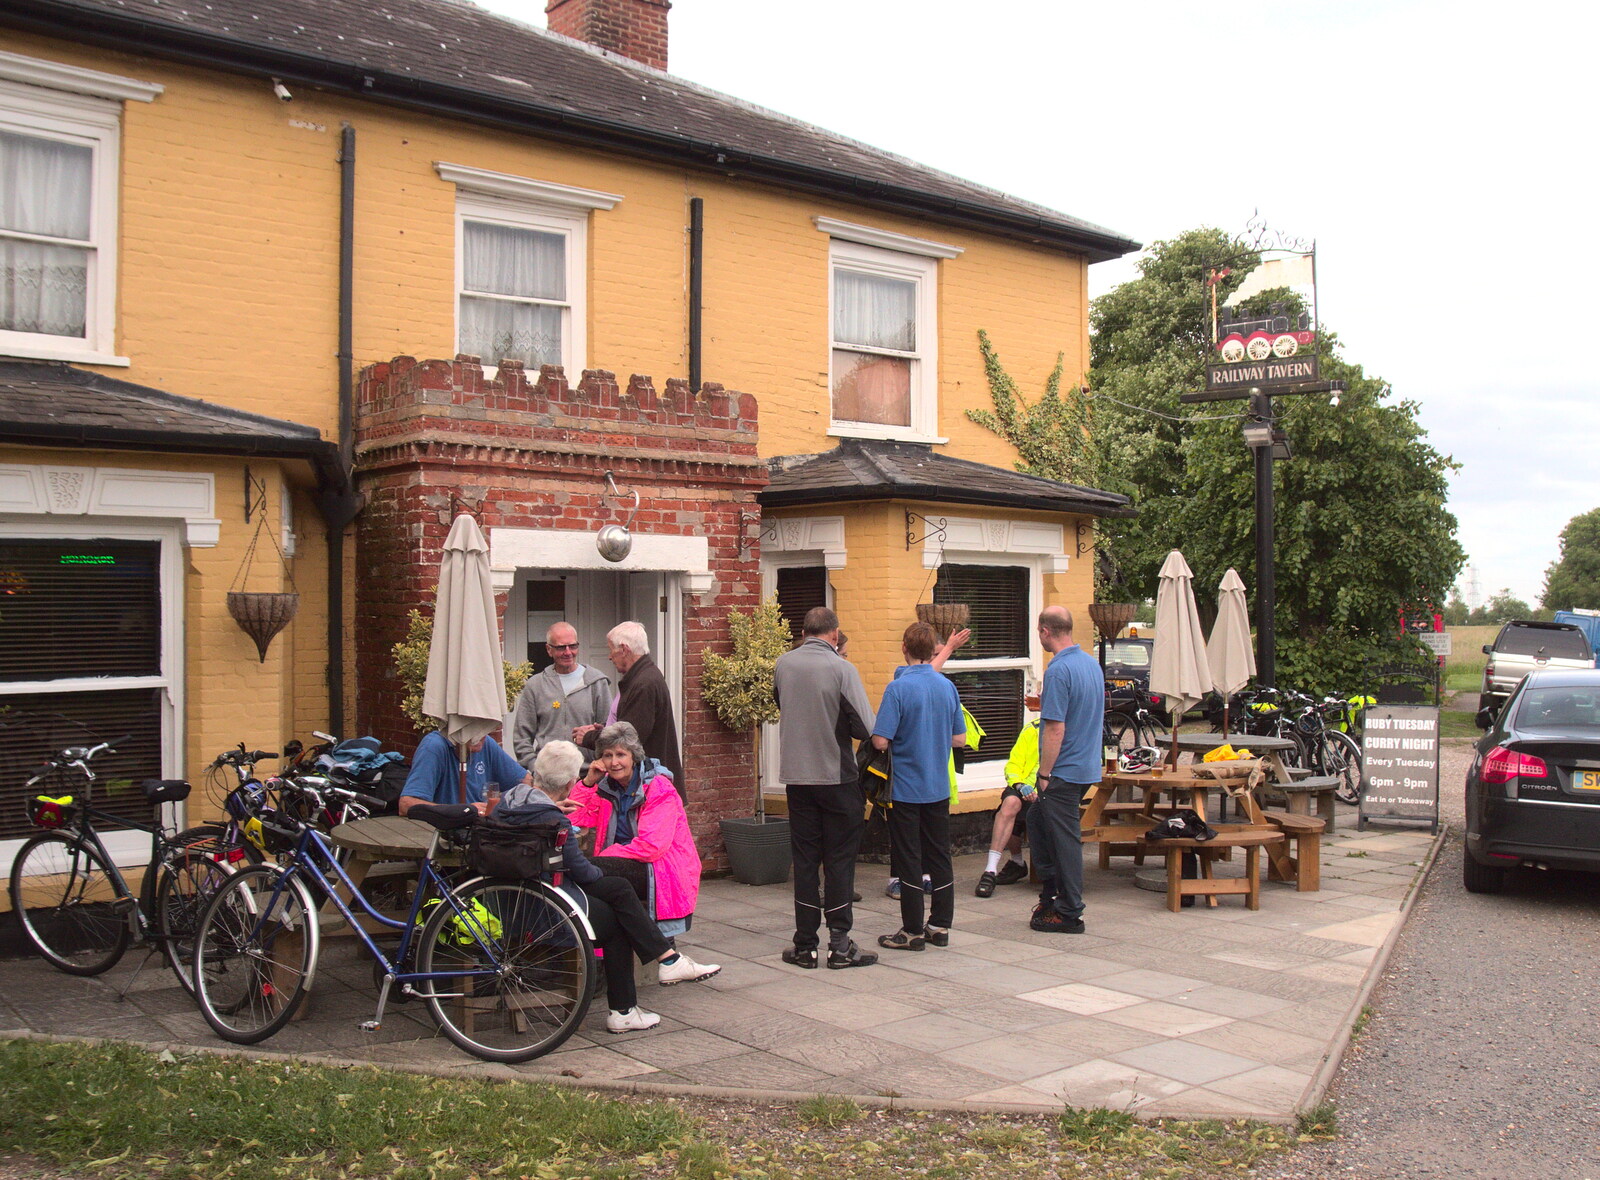 The bike club outside the Mellis Railway from The BSCC at the Mellis Railway and The Swan, Brome, Suffolk - 8th June 2017